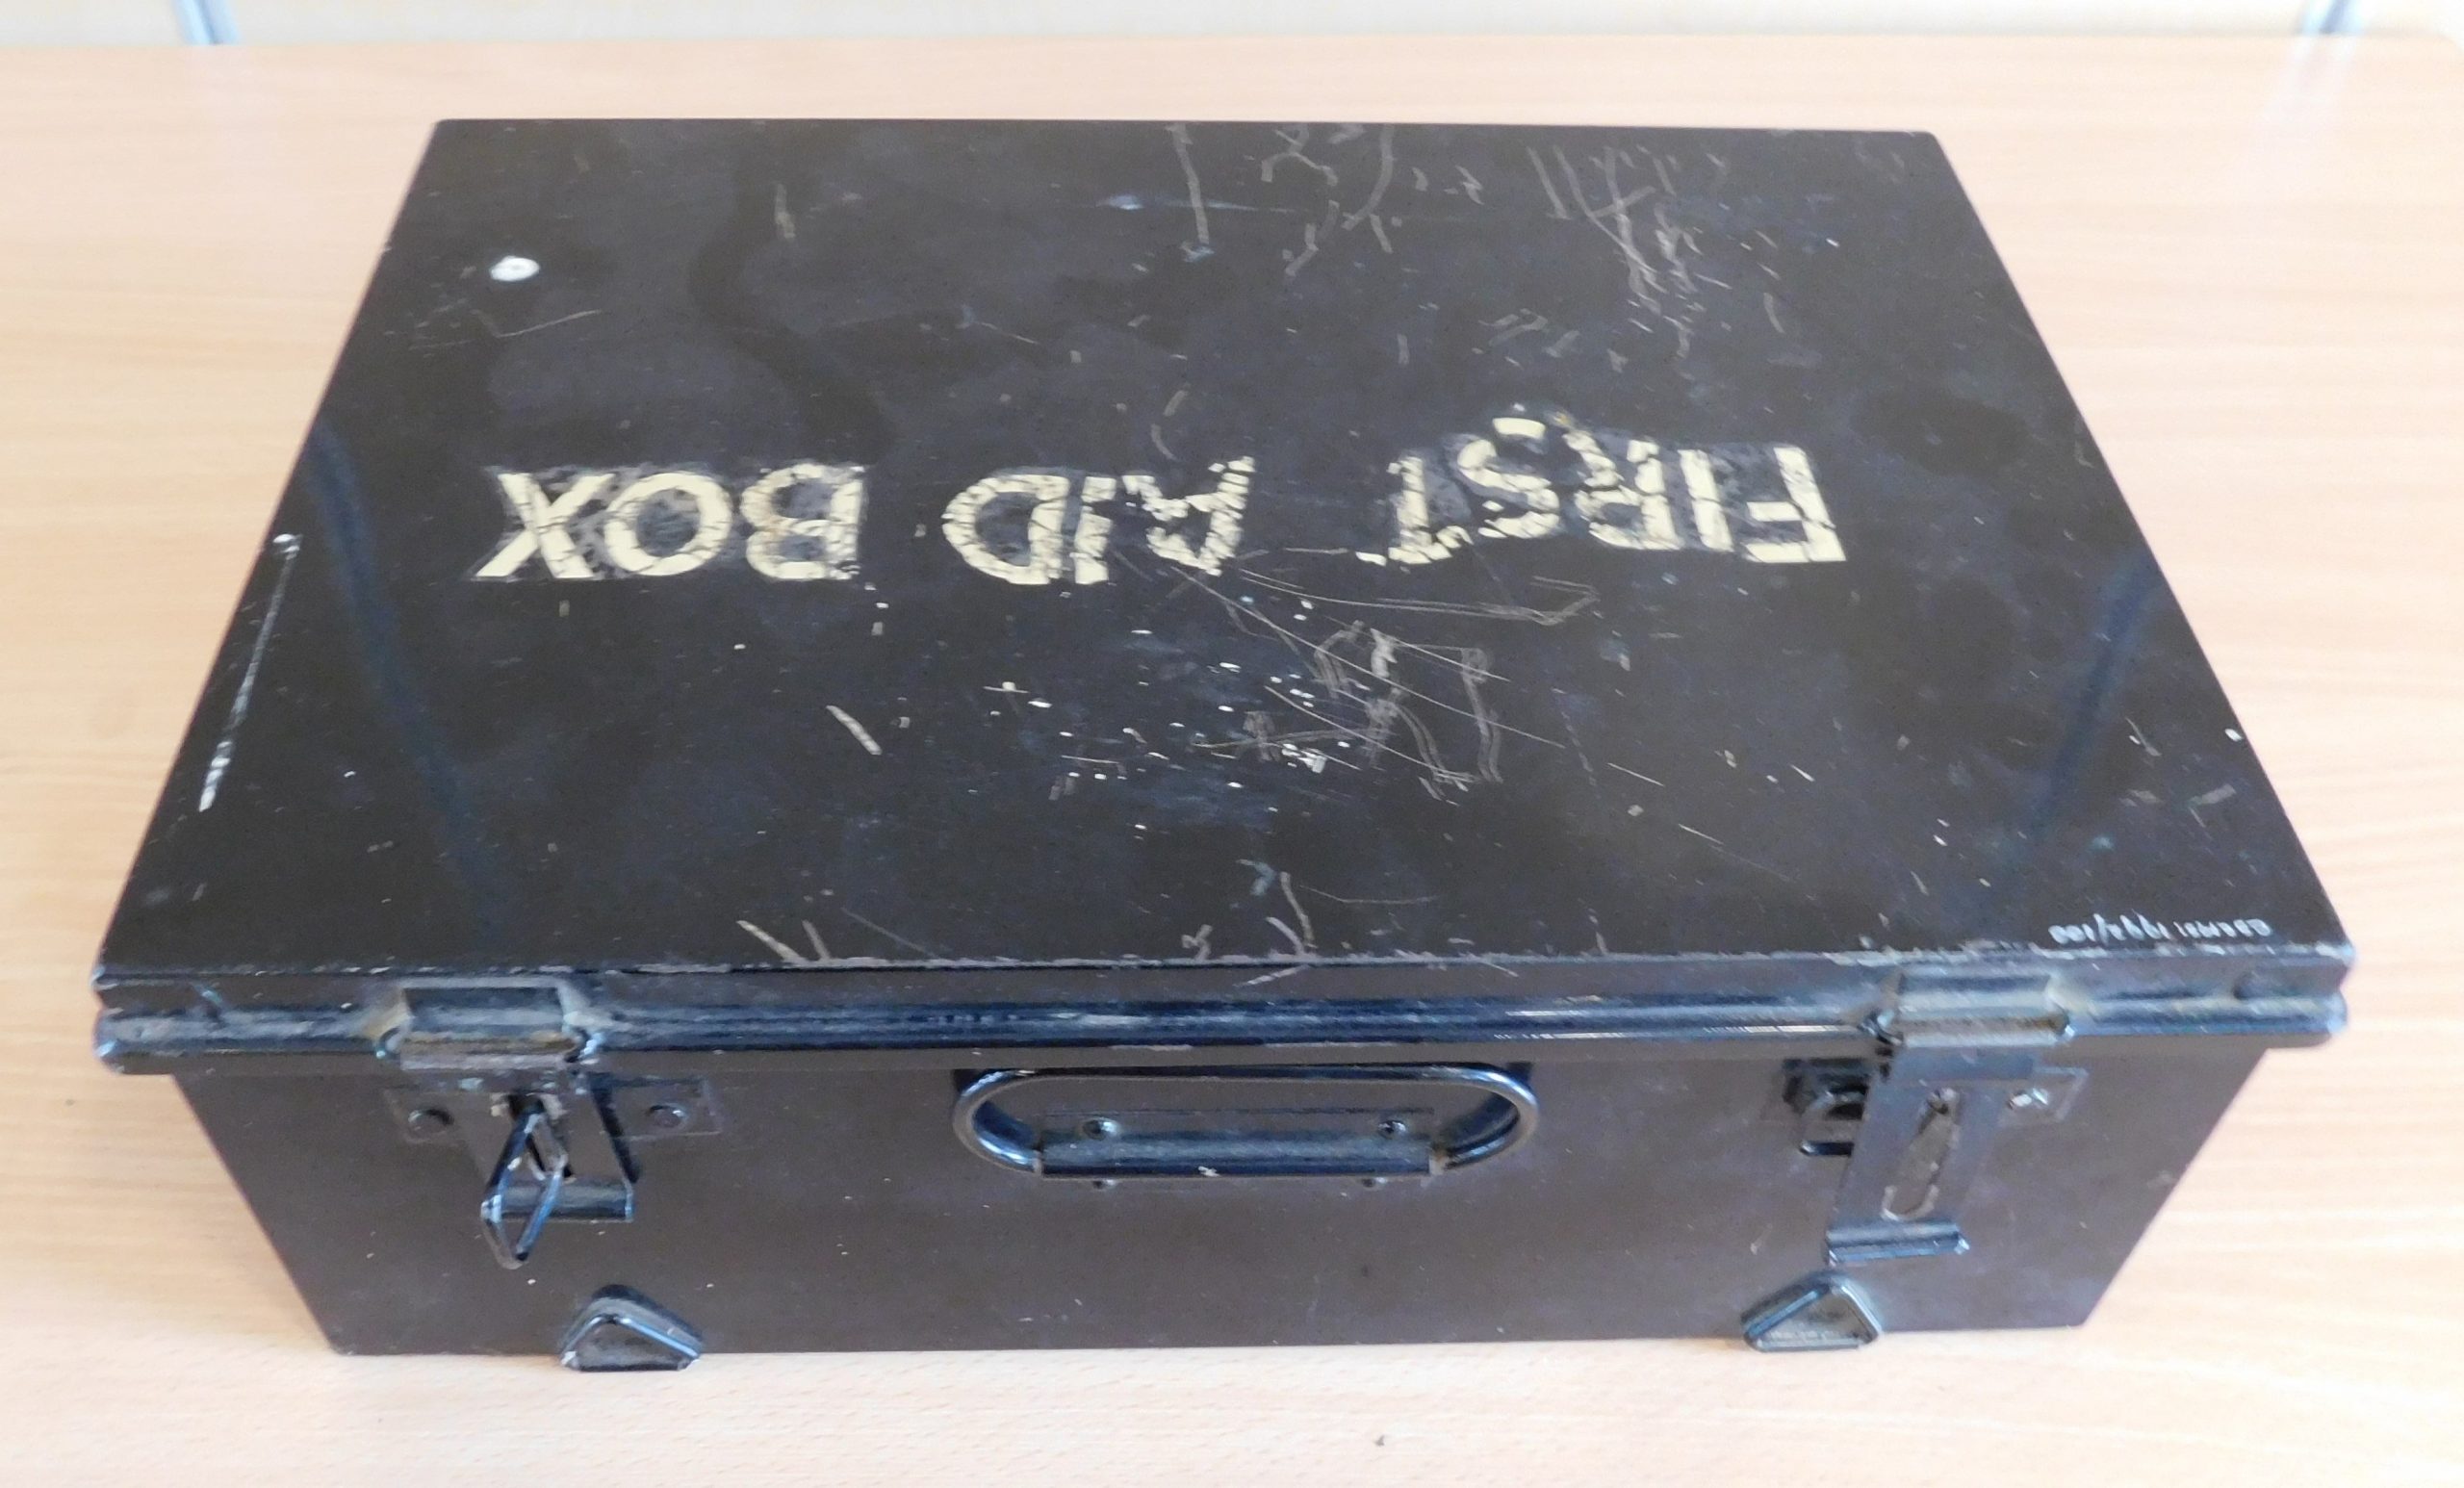 Black metal box with words 'First Aid Box' in white on the lid.